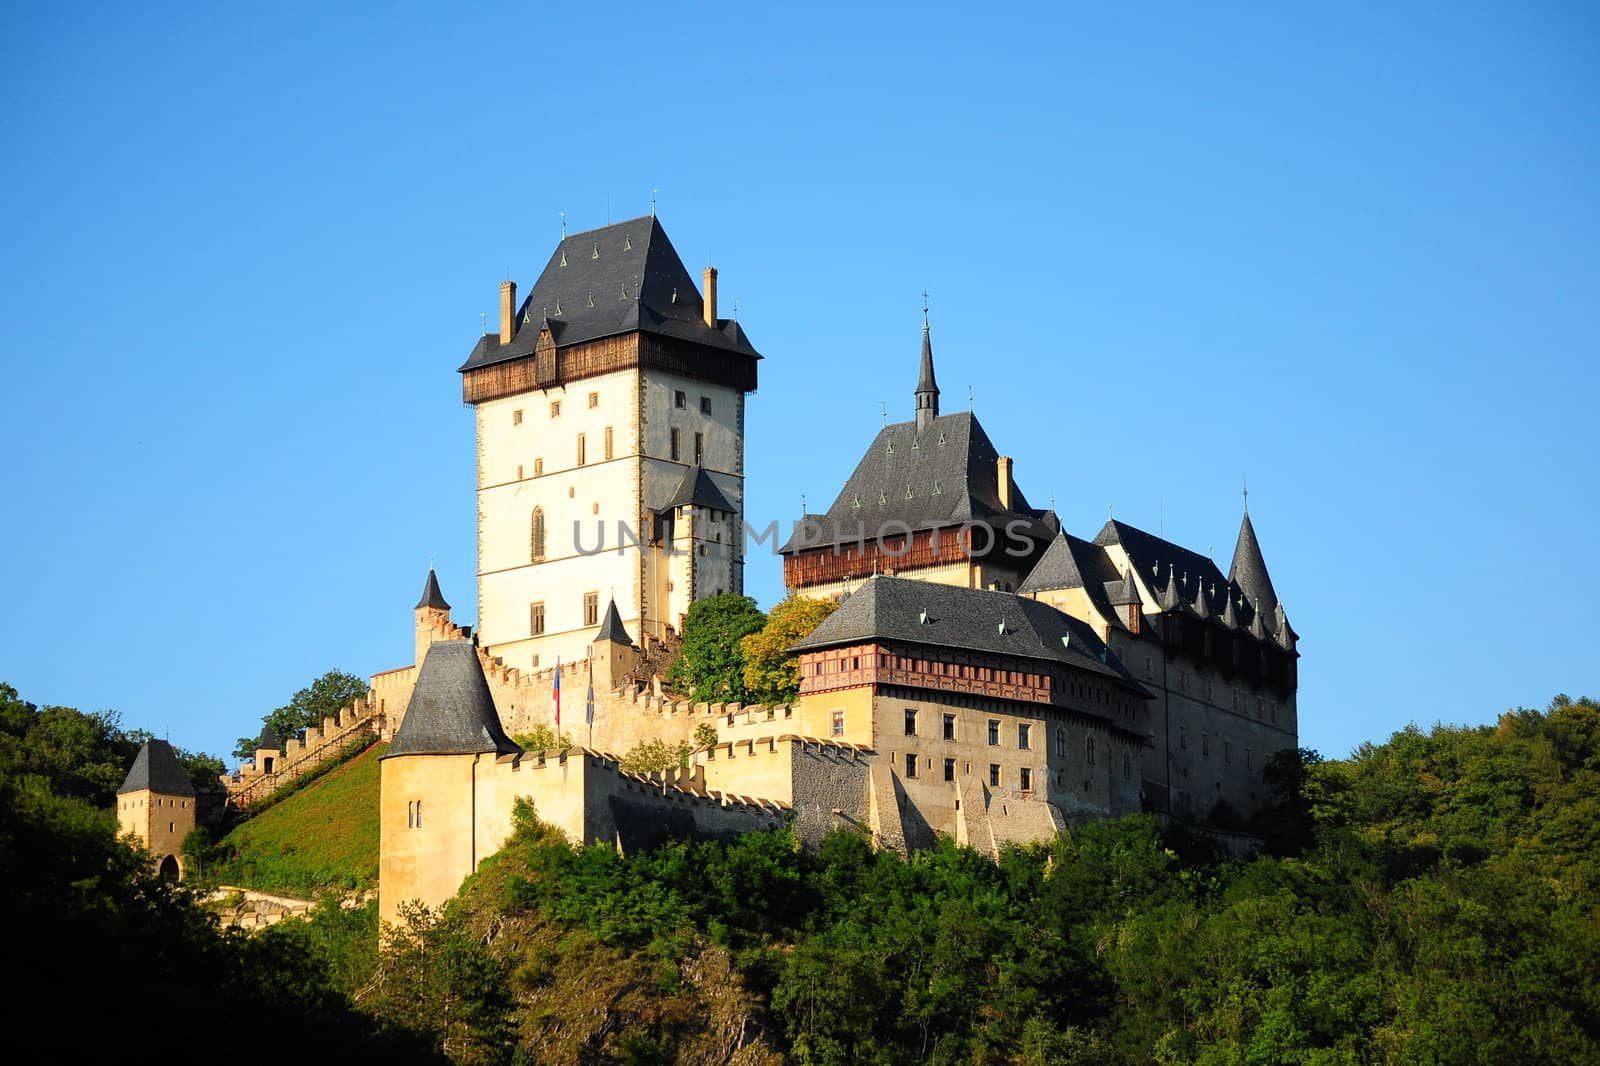 Panorama of the Karlstejn Castle over blue sky during the summer day